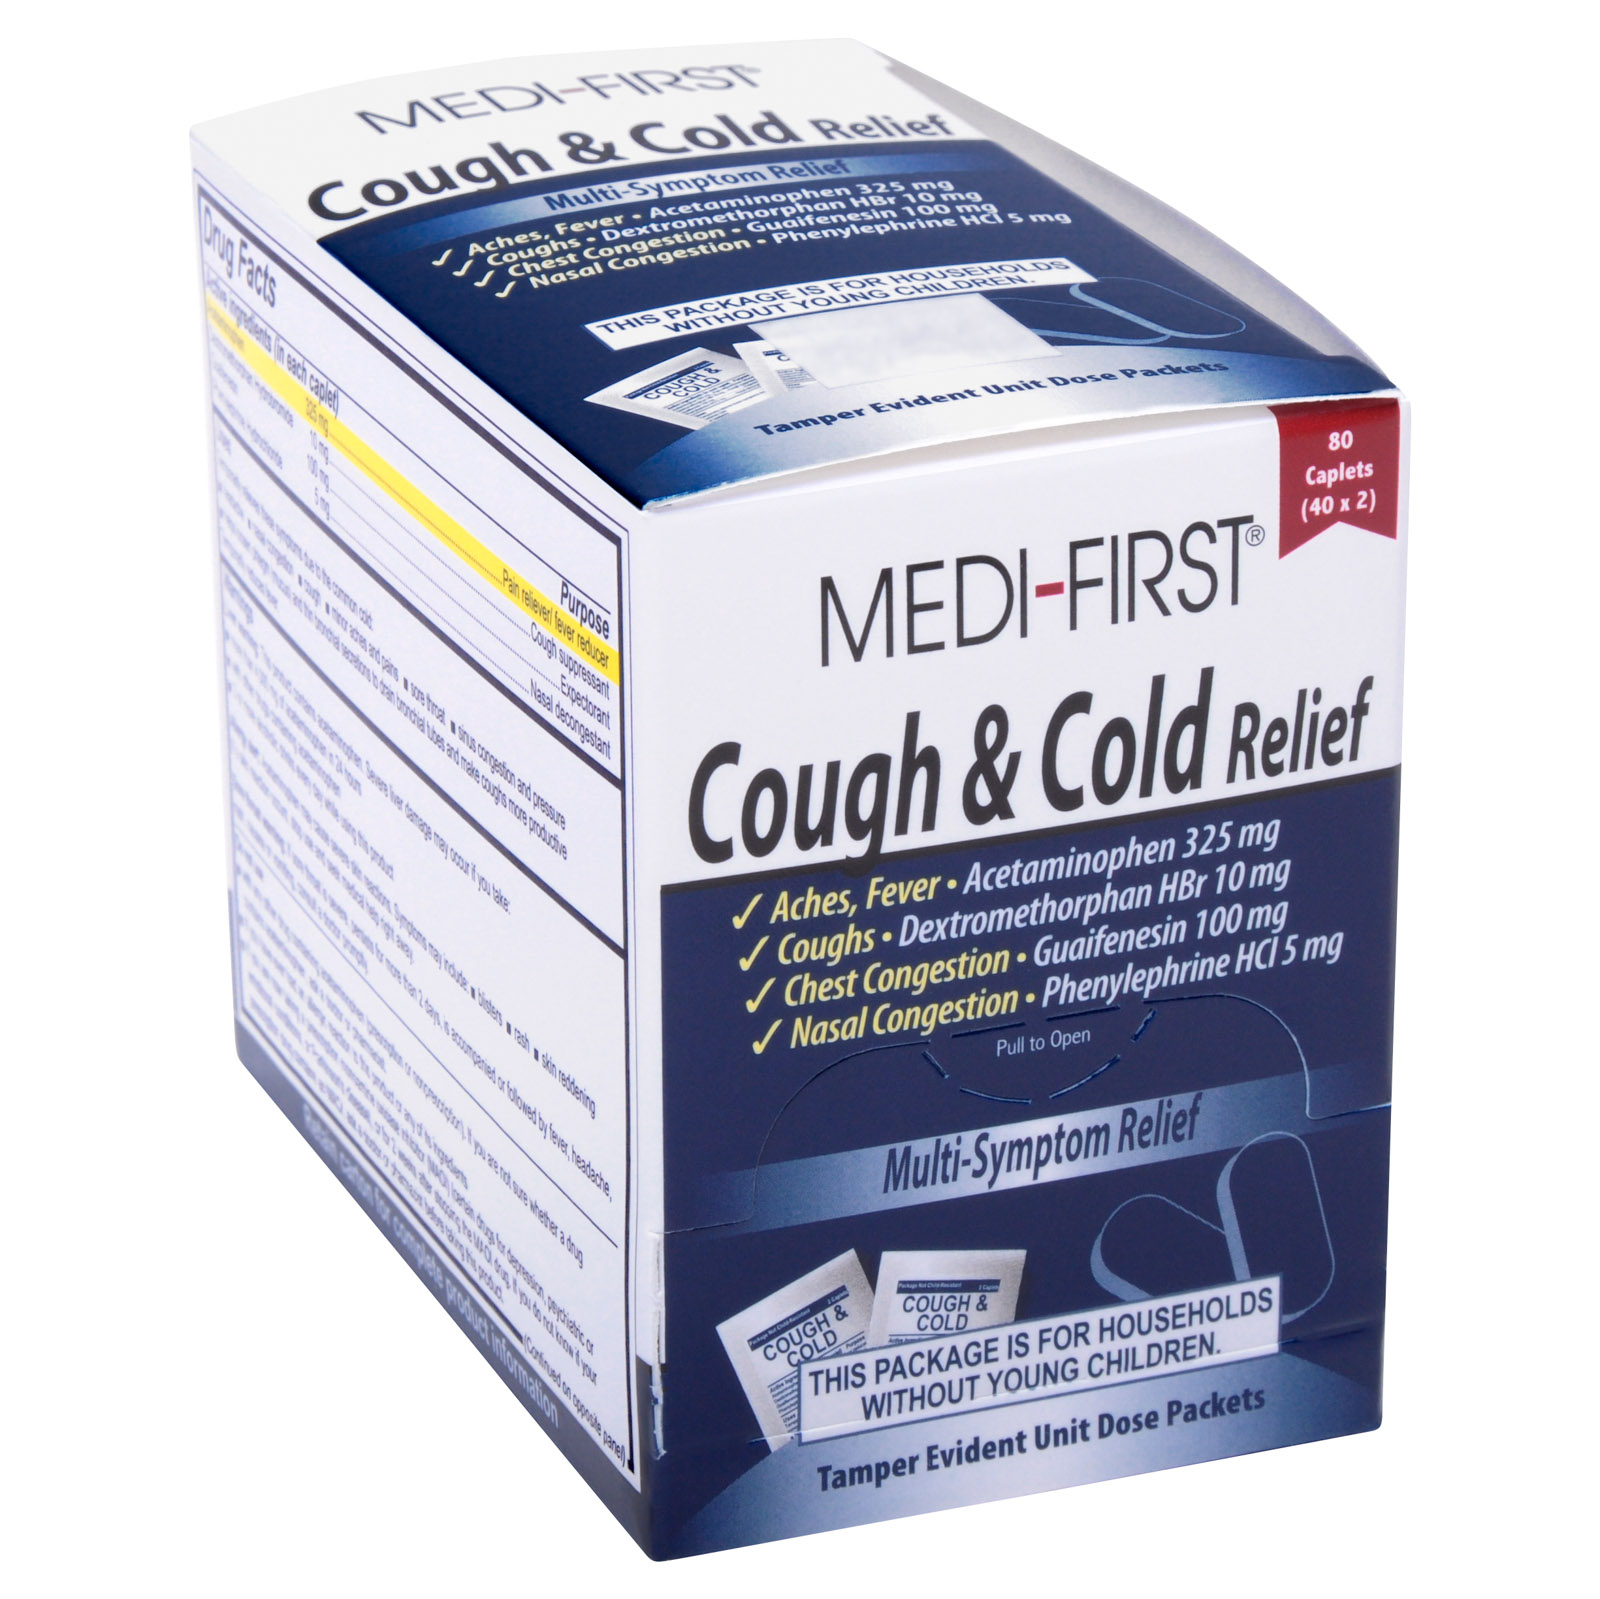 Medi-First Cough & Cold Relief